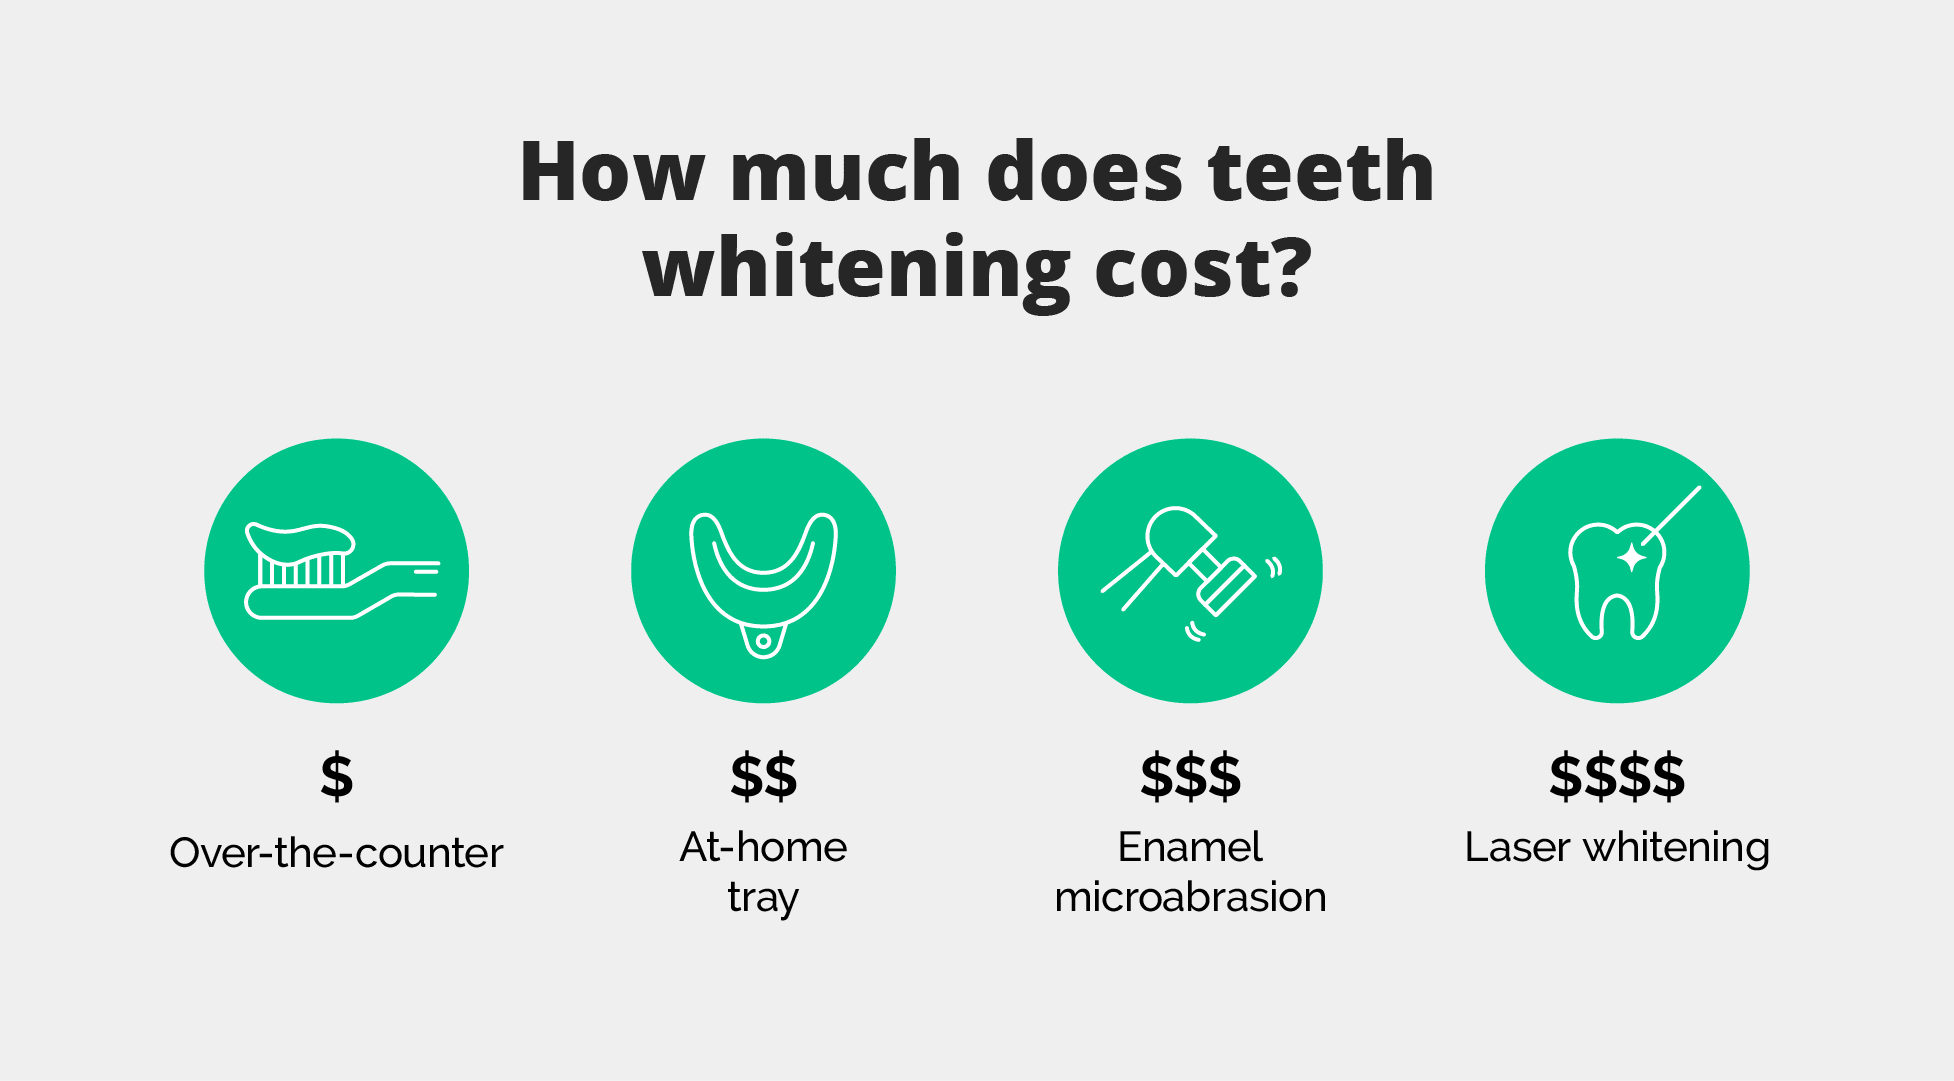 How much does teeth whitening cost in Canada? Over-the-counter; at-home; enamel microabrasion; laser whitening